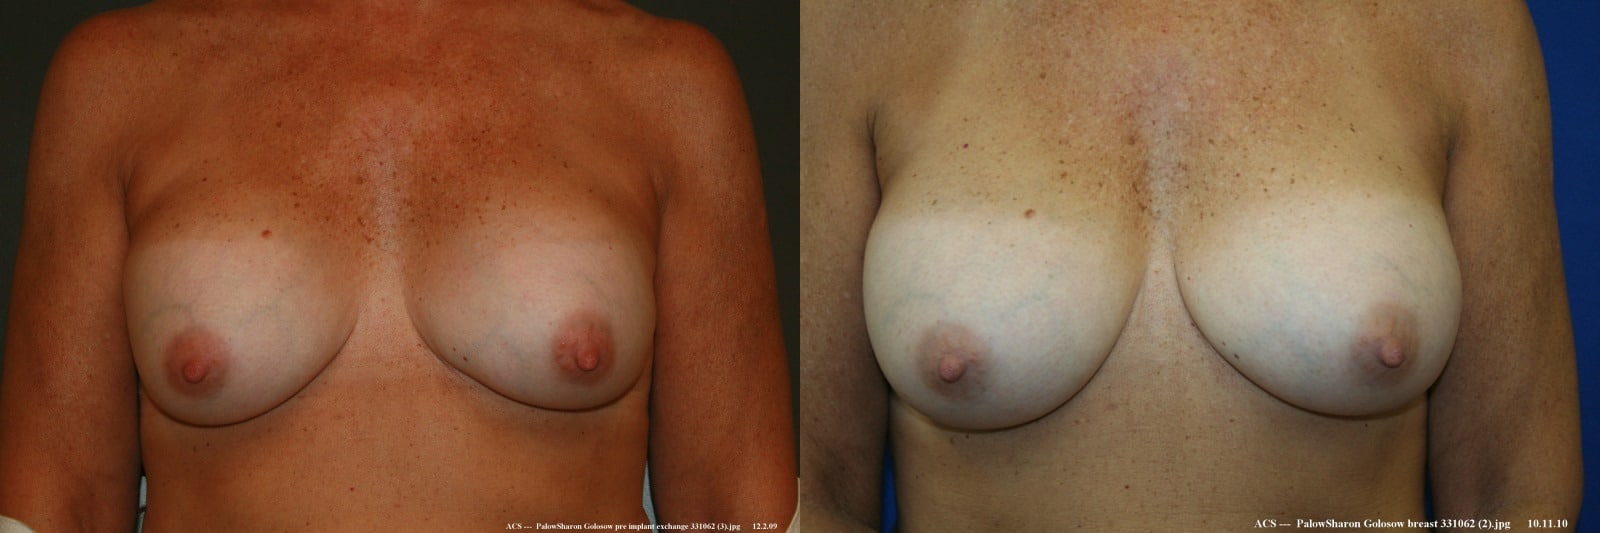 before and after breast implant exchange